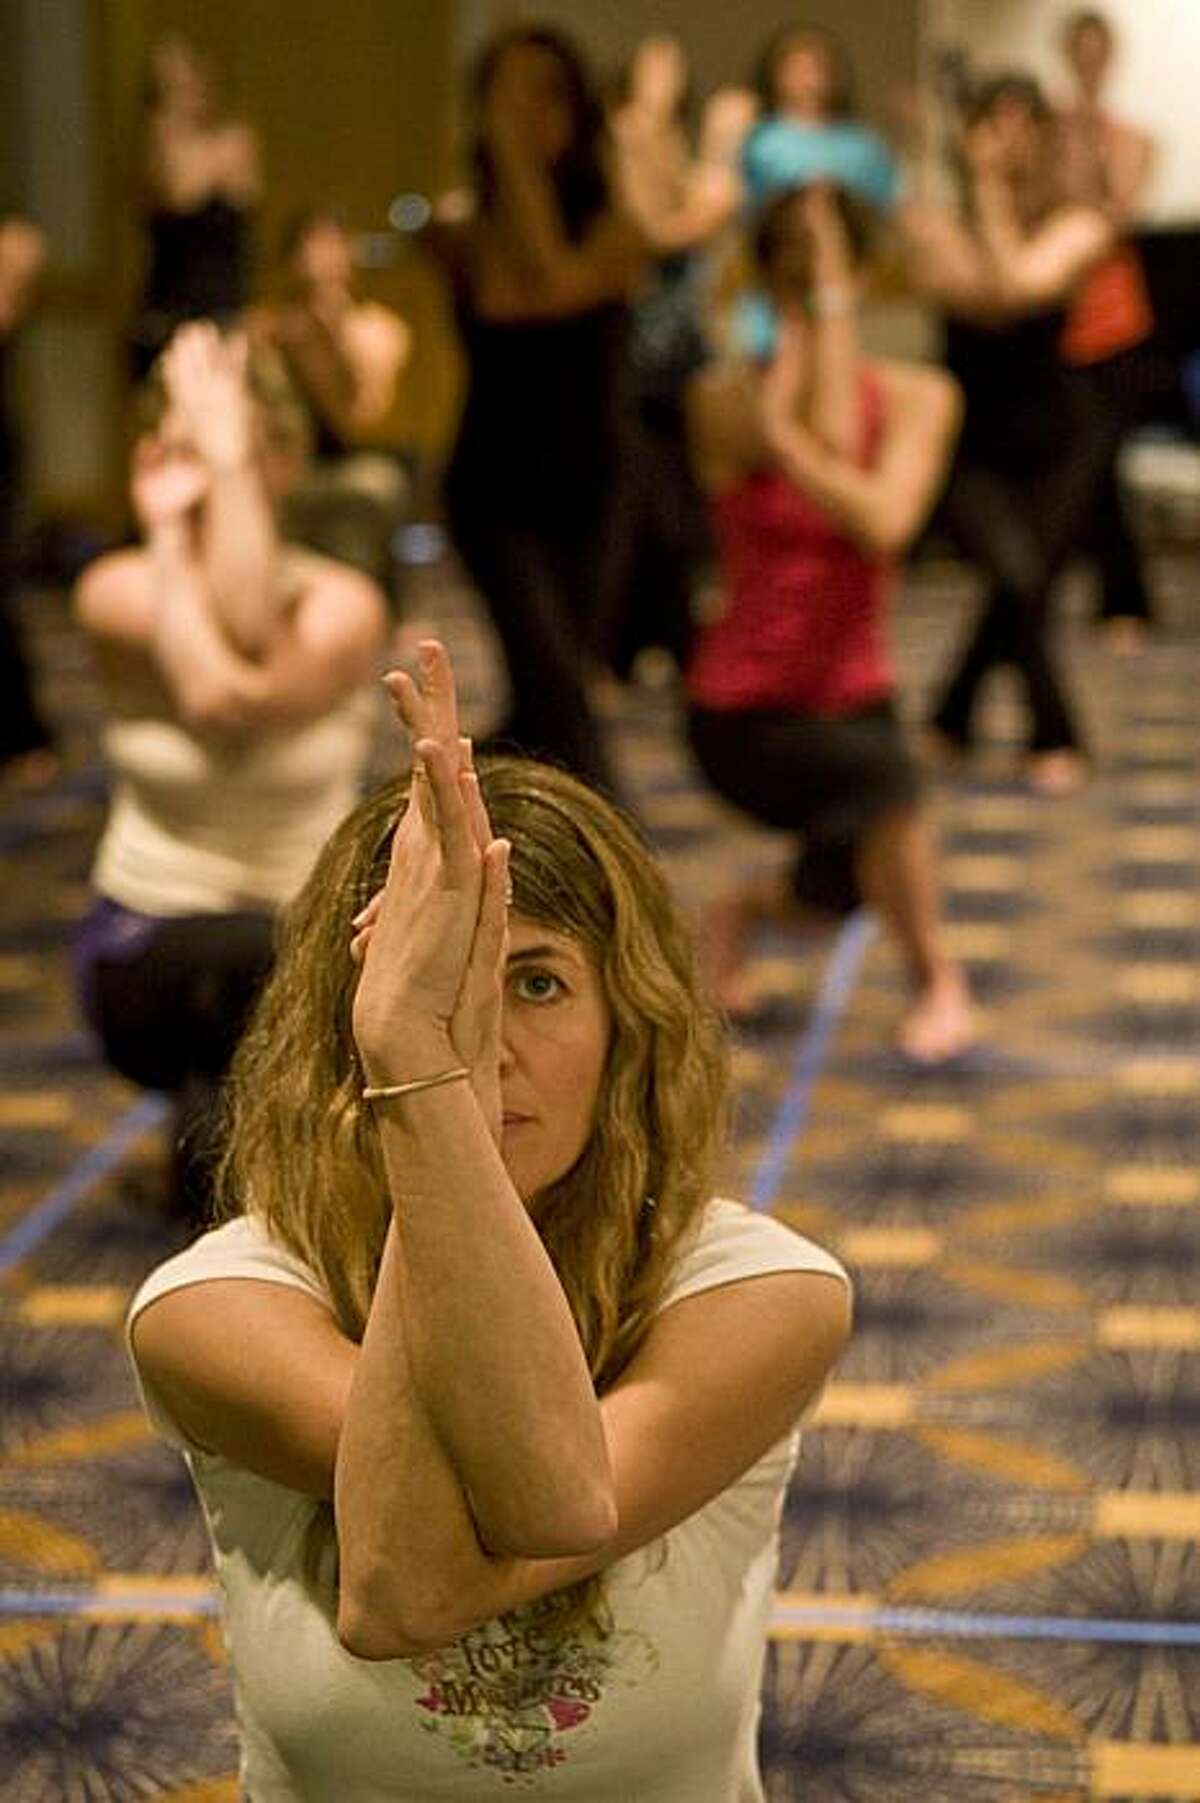 Lisa Rueff, first time participant in shadow yoga class lead by Scott Blossom at the Yoga Conference, San Francisco, Calif. Saturday January 30, 2010